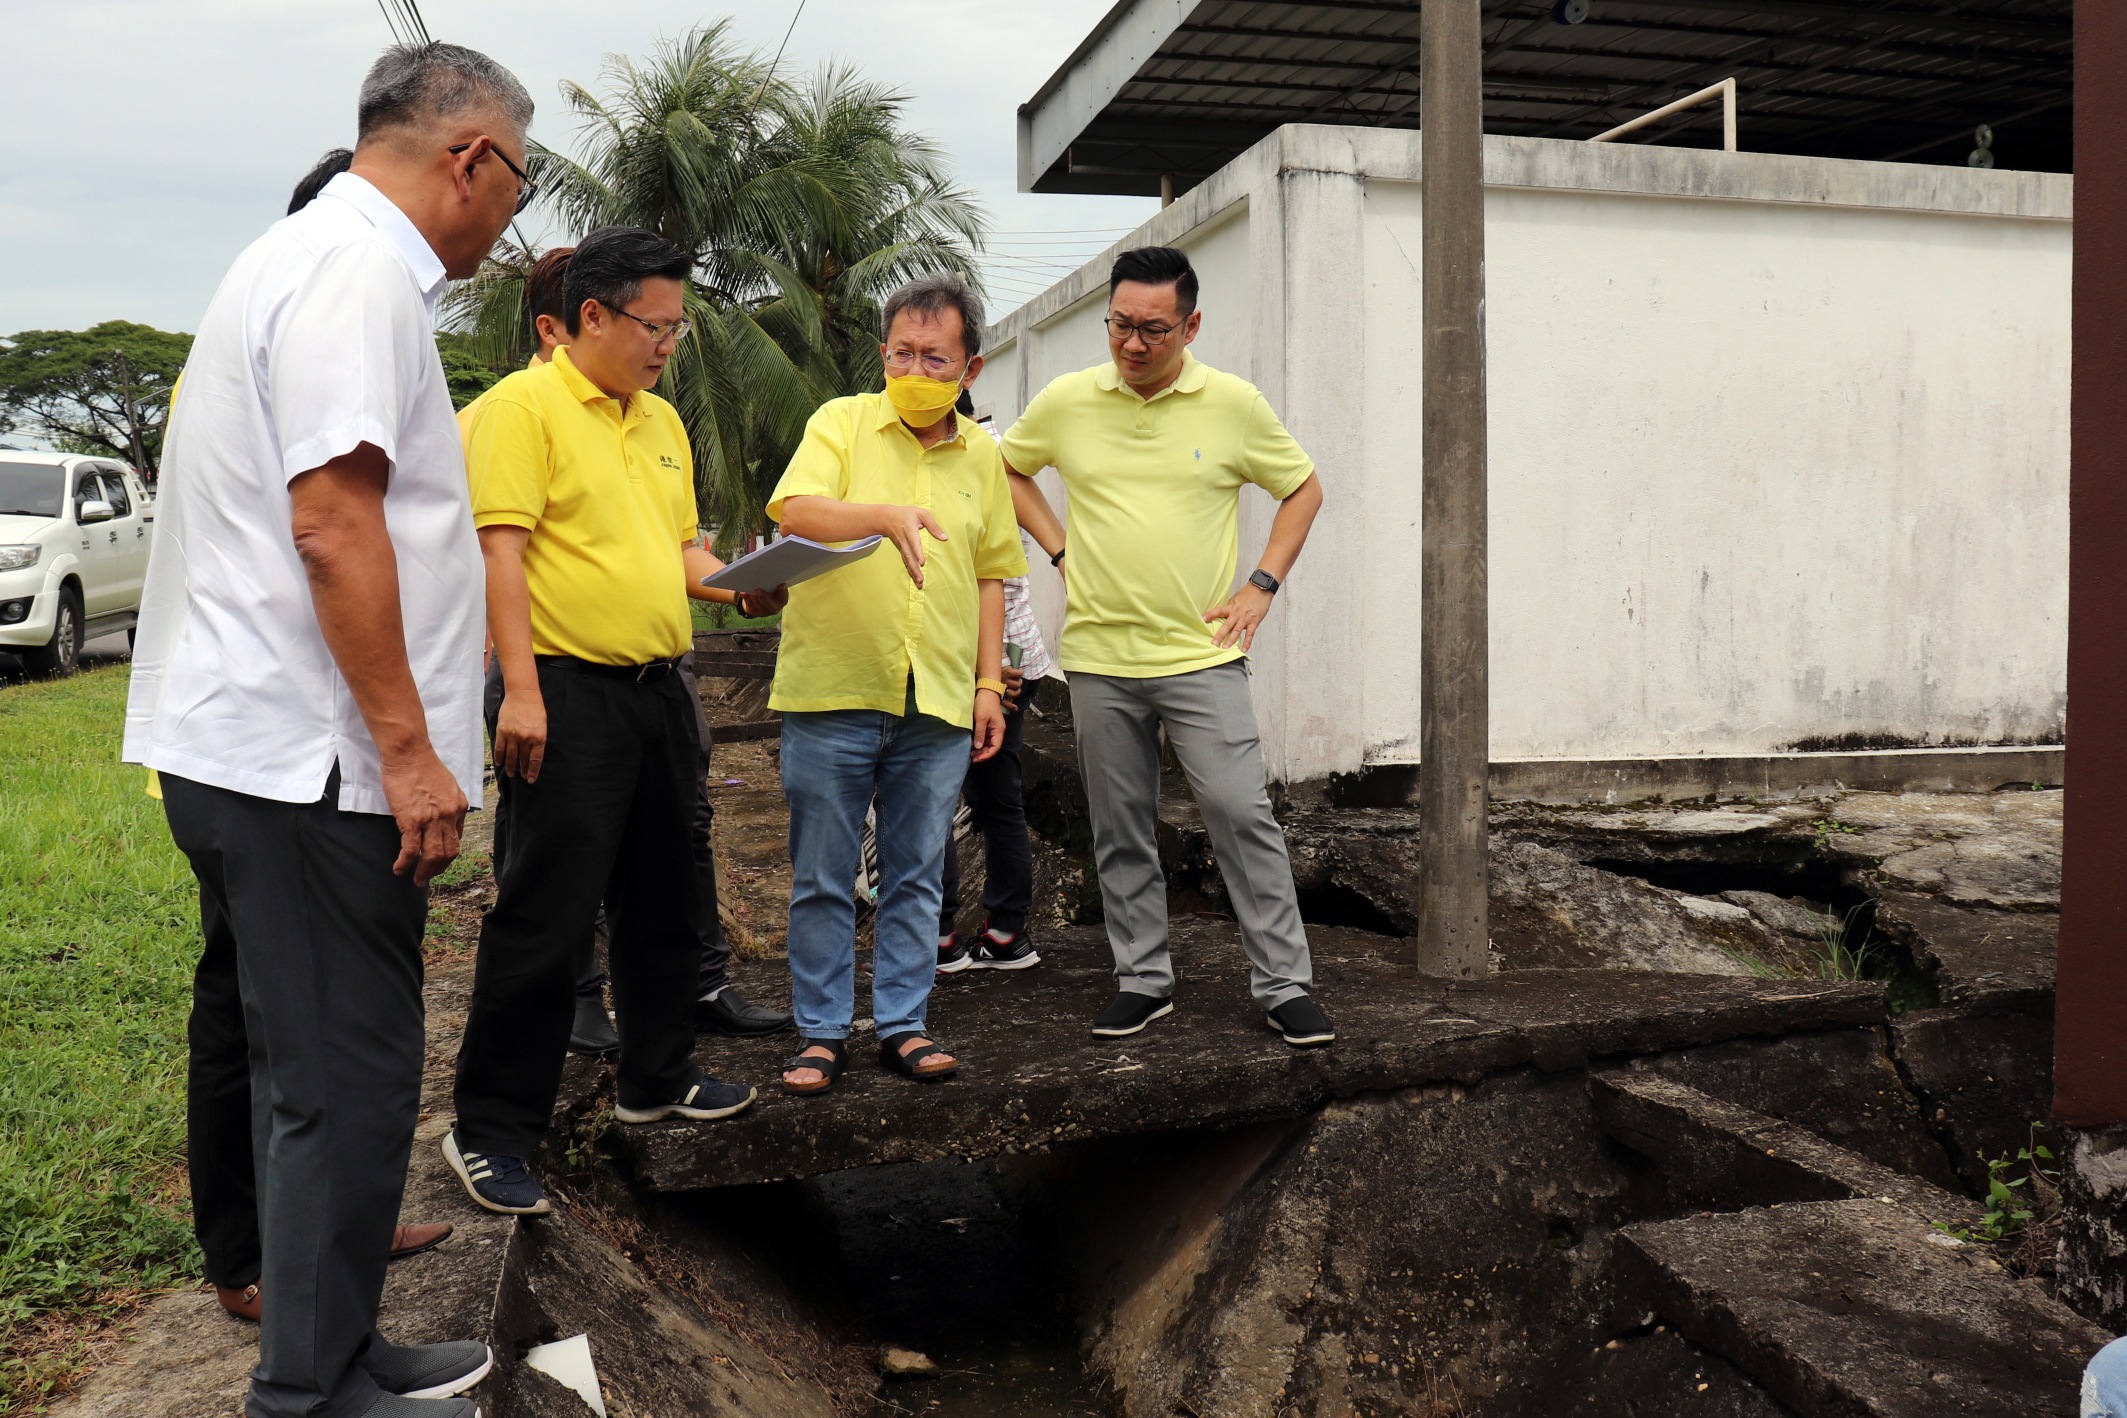 Dr Sim (second right) highlights a point during the inspection on a drain at Jalan Perpati. With him are (front, from left) Ting, Chieng and Tiang.